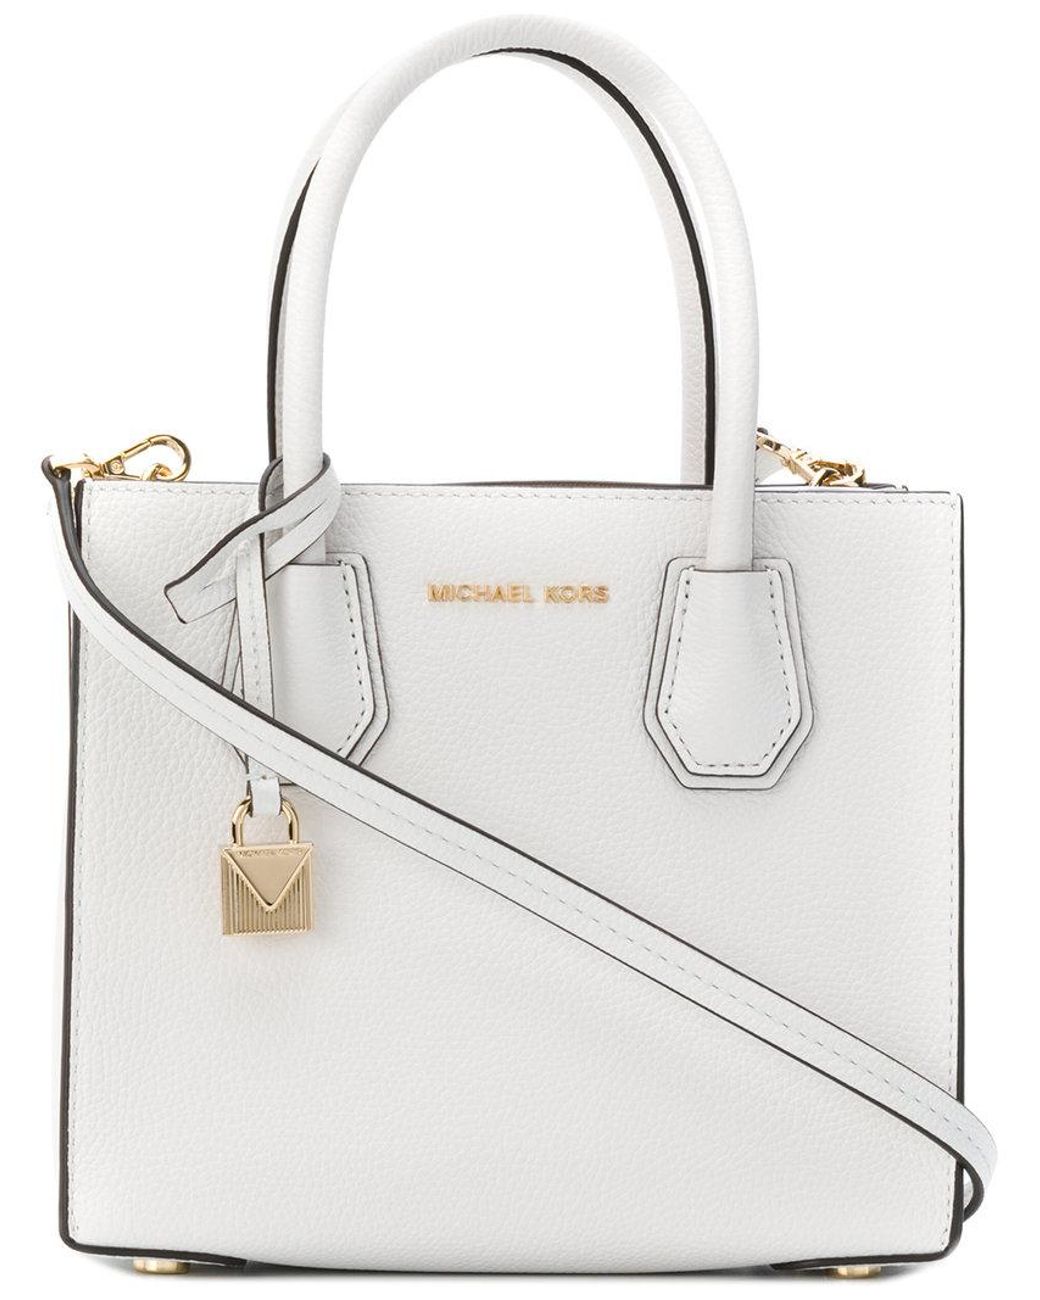 How to tell if a Michael Kors purse is fake - Quora